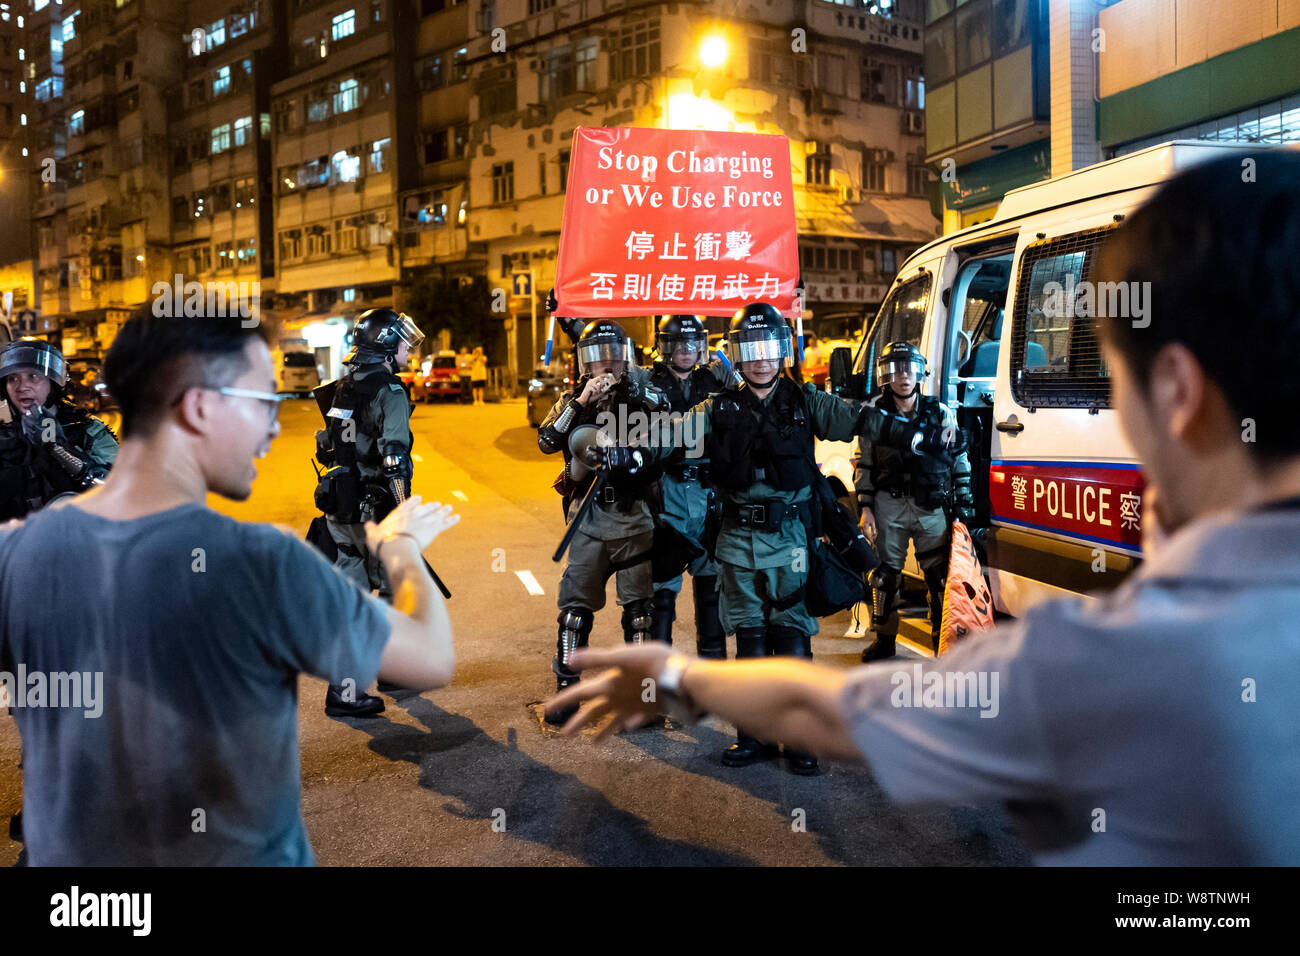 Hong Kong, China. 12th August 2019. Protesters clashed with Police outside the Yau Tsim District Police Headquarters and Tsim Sha Tsui Police Station on Sunday where tear gas and pepper spray were used to control the crowds. Demonstrations are set to continue in the coming days. The anti-extradition bill protests are a series of ongoing demonstrations in Hong Kong against the Fugitive Offenders and Mutual Legal Assistance in Criminal Matters Legislation Bill proposed by the government of Hong Kong. Credit: Joshua Preston/Alamy Live News Stock Photo